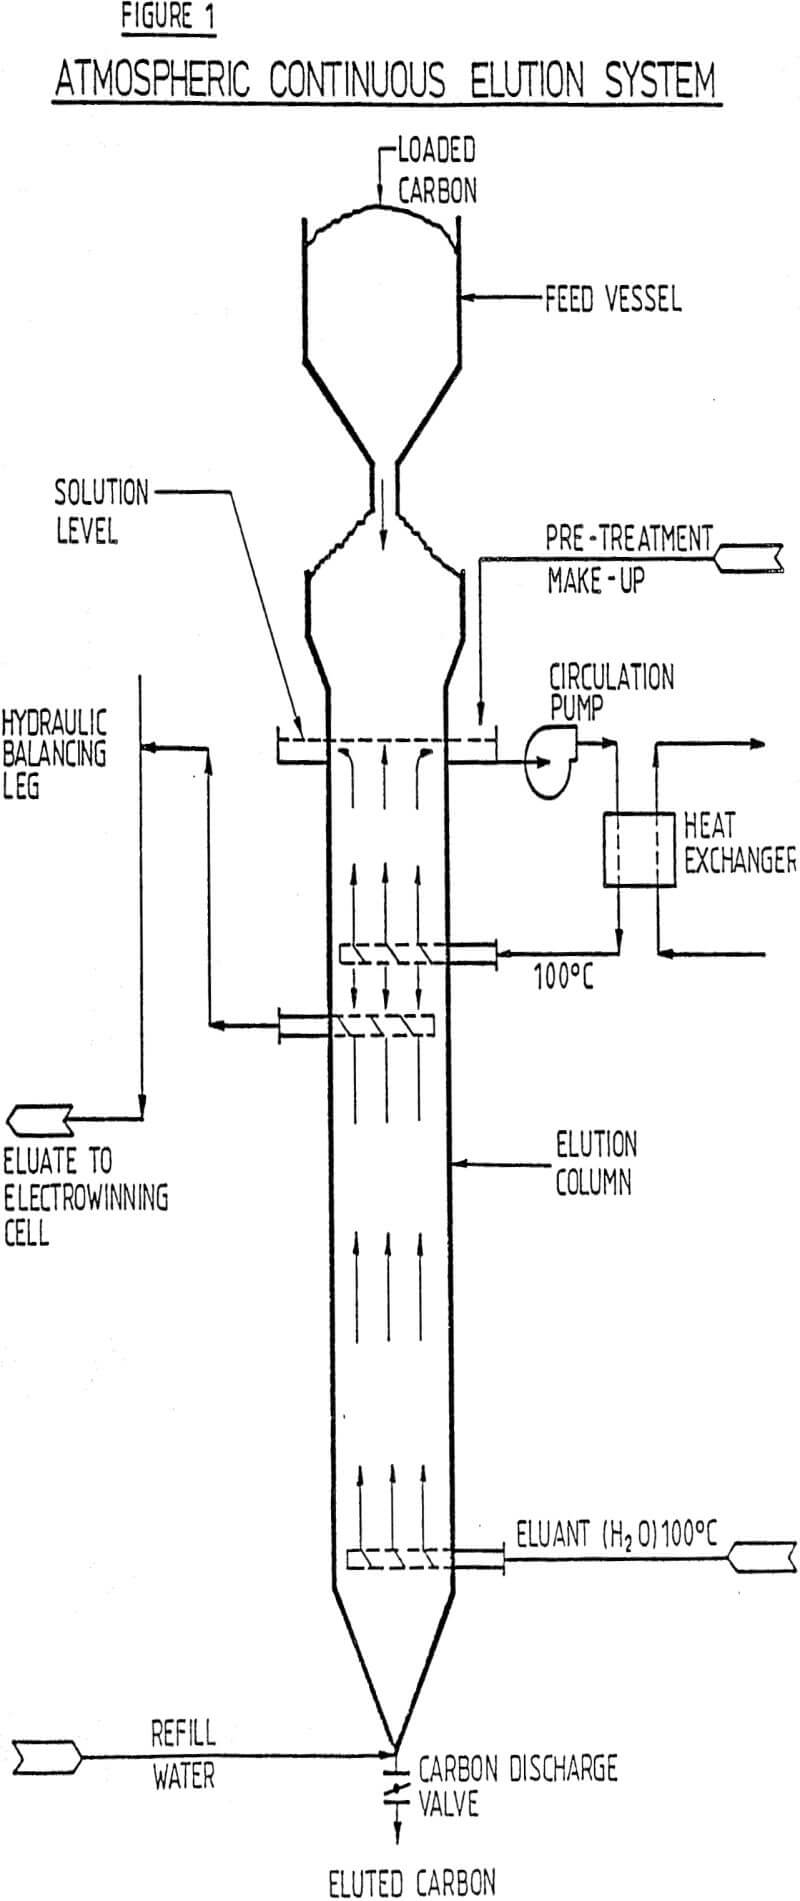 atmospheric continuous elution system